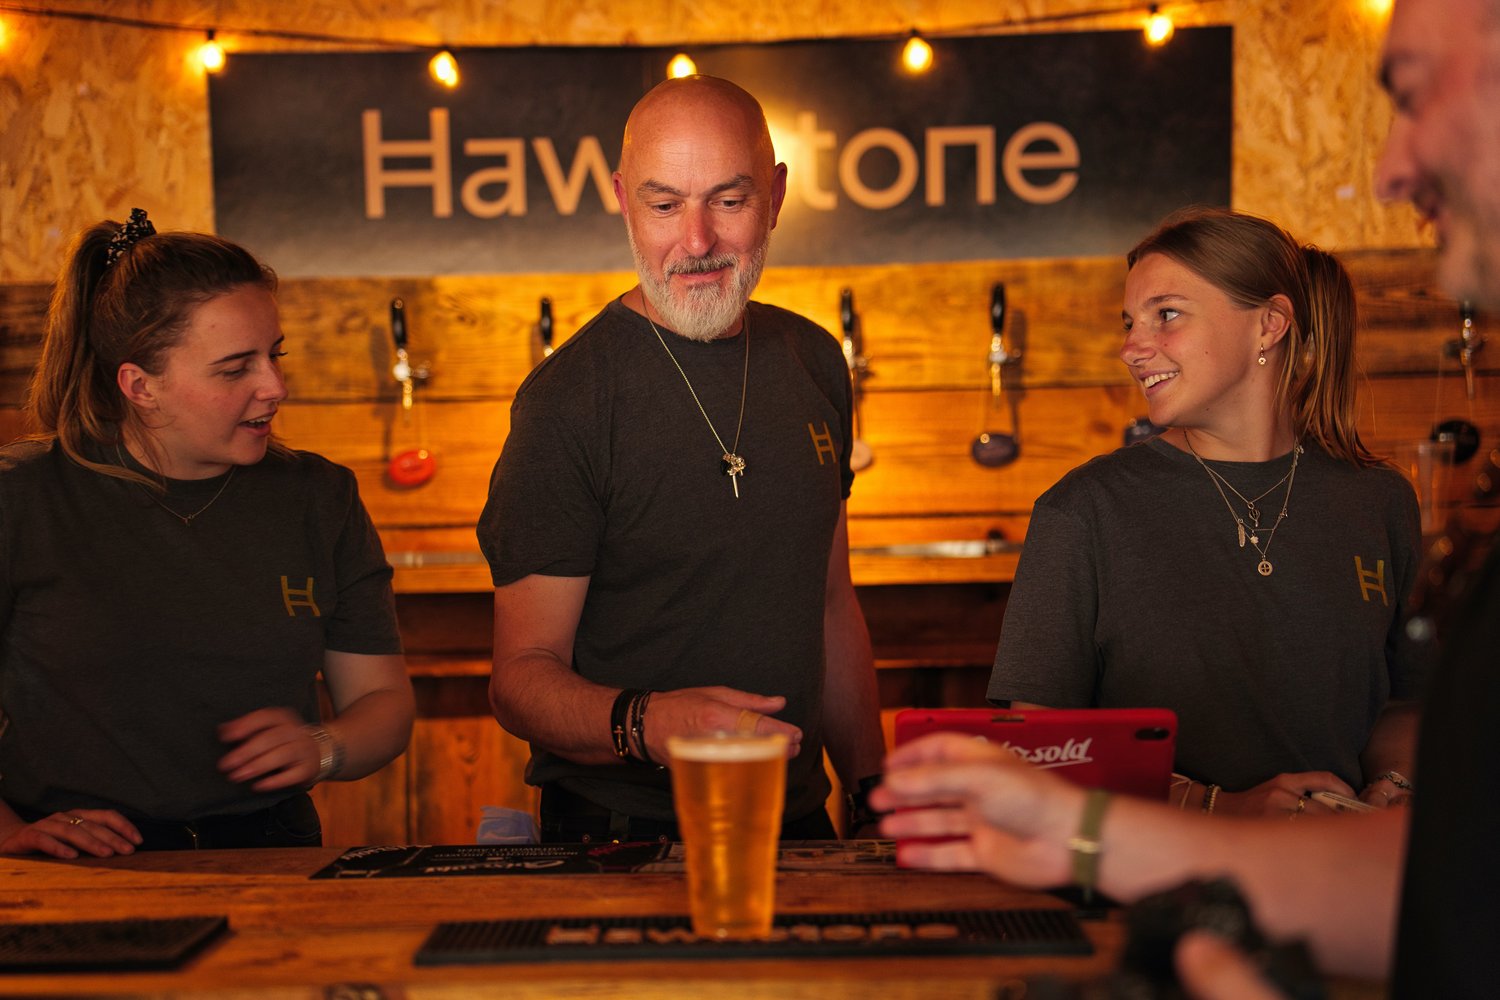 Hawkstone Brewery Tours & Events